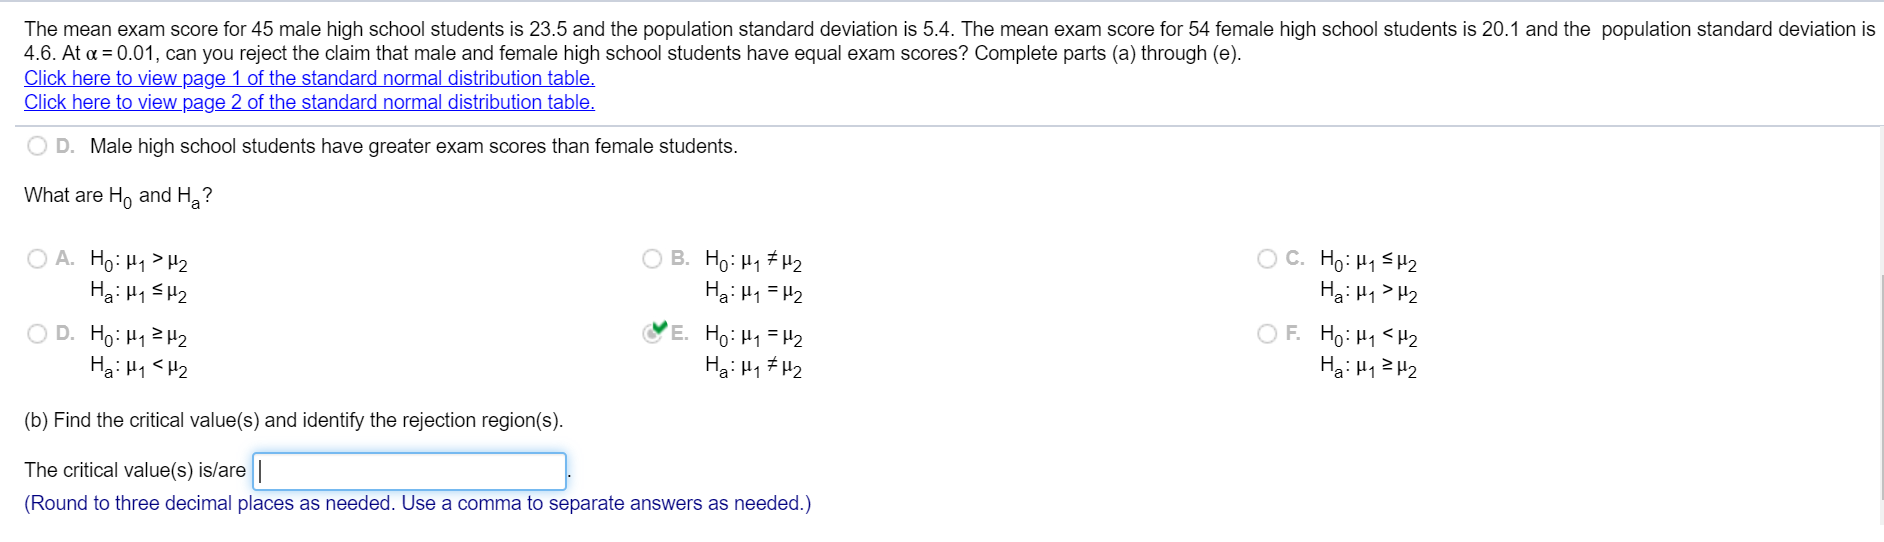 The mean exam score for 45 male high school students is 23.5 and the population standard deviation is 5.4. The mean exam score for 54 female high school students is 20.1 and the population standard deviation is
4.6. At a = 0.01, can you reject the claim that male and female high school students have equal exam scores? Complete parts (a) through (e).
Click here to view page 1 of the standard normal distribution table.
Click here to view page 2 of the standard normal distribution table.
O D. Male high school students have greater exam scores than female students.
What are Ho and H?
O A. Ho: H1 > H2
Ha: H1 SH2
O B. Ho: H1 #H2
Hạ: H1 =H2
O C. Ho: H1 SH2
Hạ: H1 > H2
O D. Ho: H12H2
Ha: H1 <H2
E. Ho: H1=H2
Hạ: H1 # H2
OF. Ho: H1 <H2
Ha: H12 H2
(b) Find the critical value(s) and identify the rejection region(s).
The critical value(s) is/are ||
(Round to three decimal places as needed. Use a comma to separate answers as needed.)
